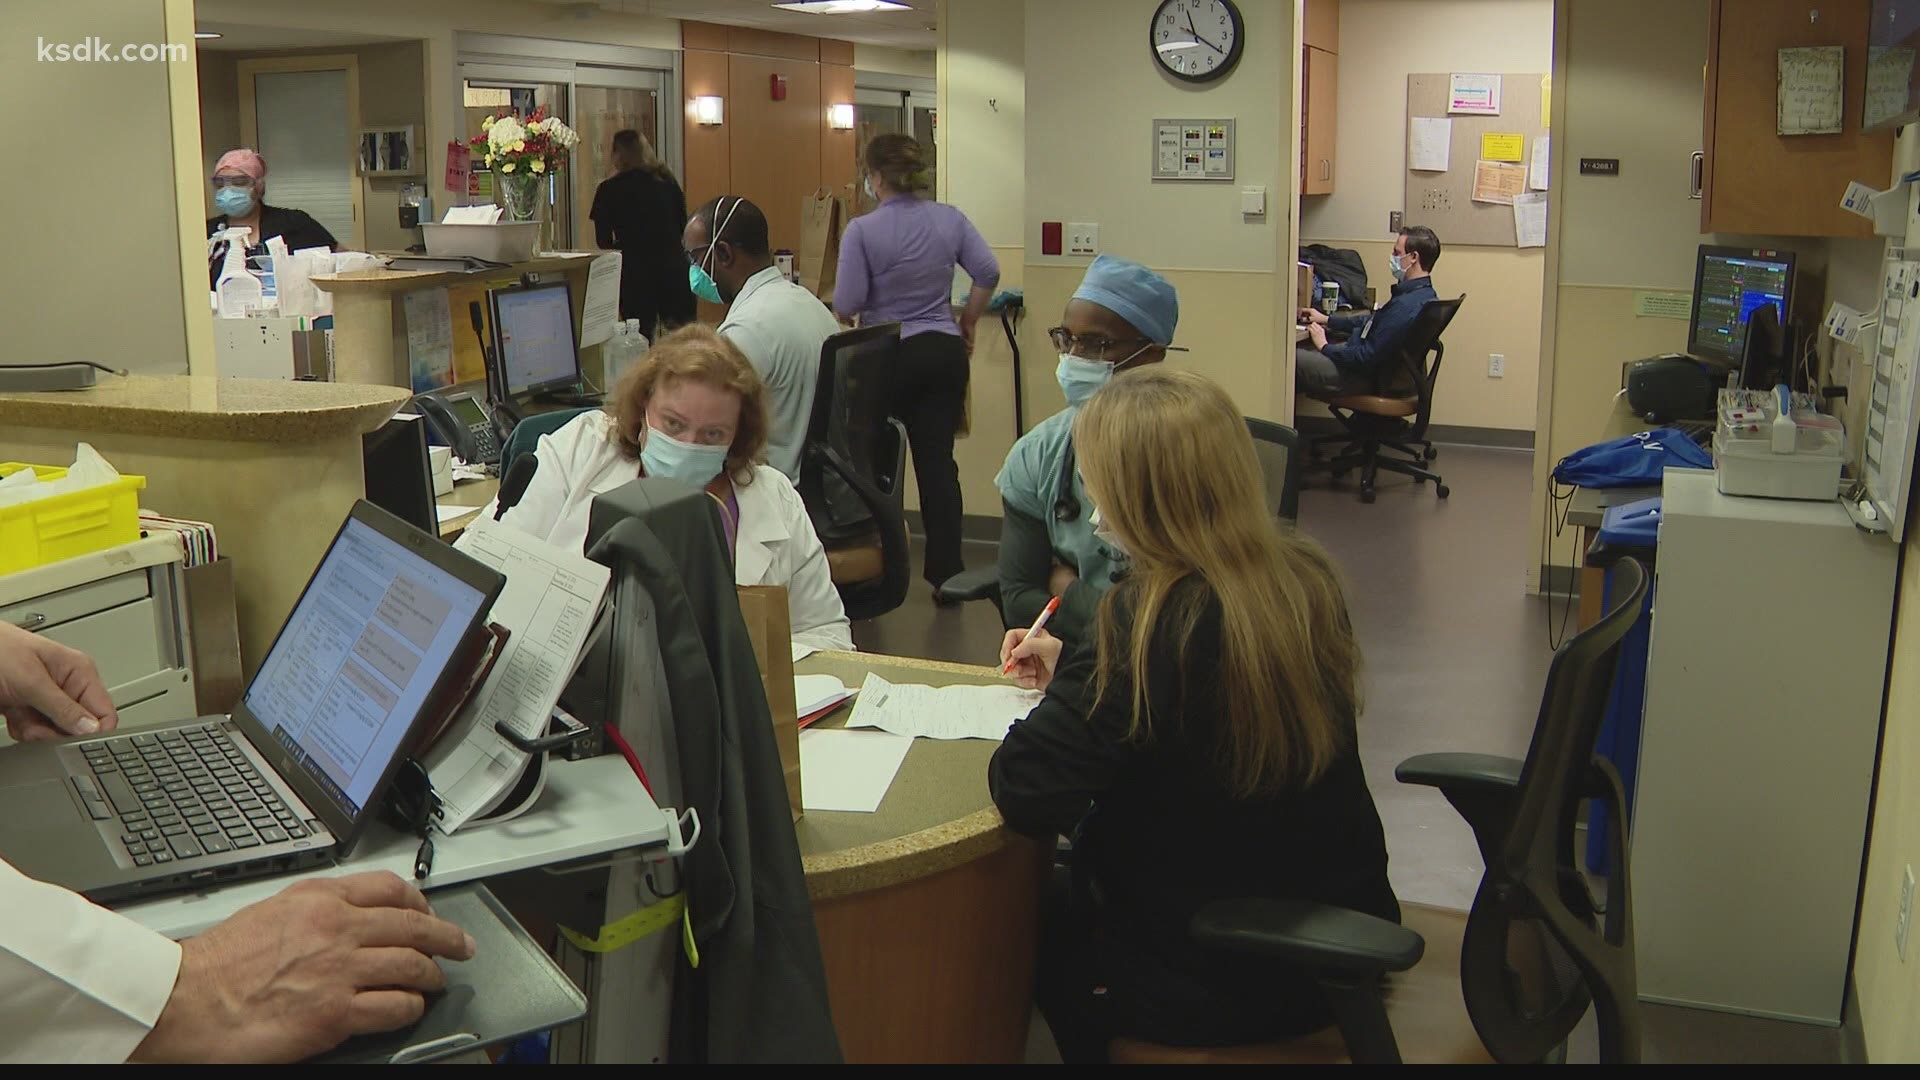 ICU's are at 88 percent capacity across the region right now